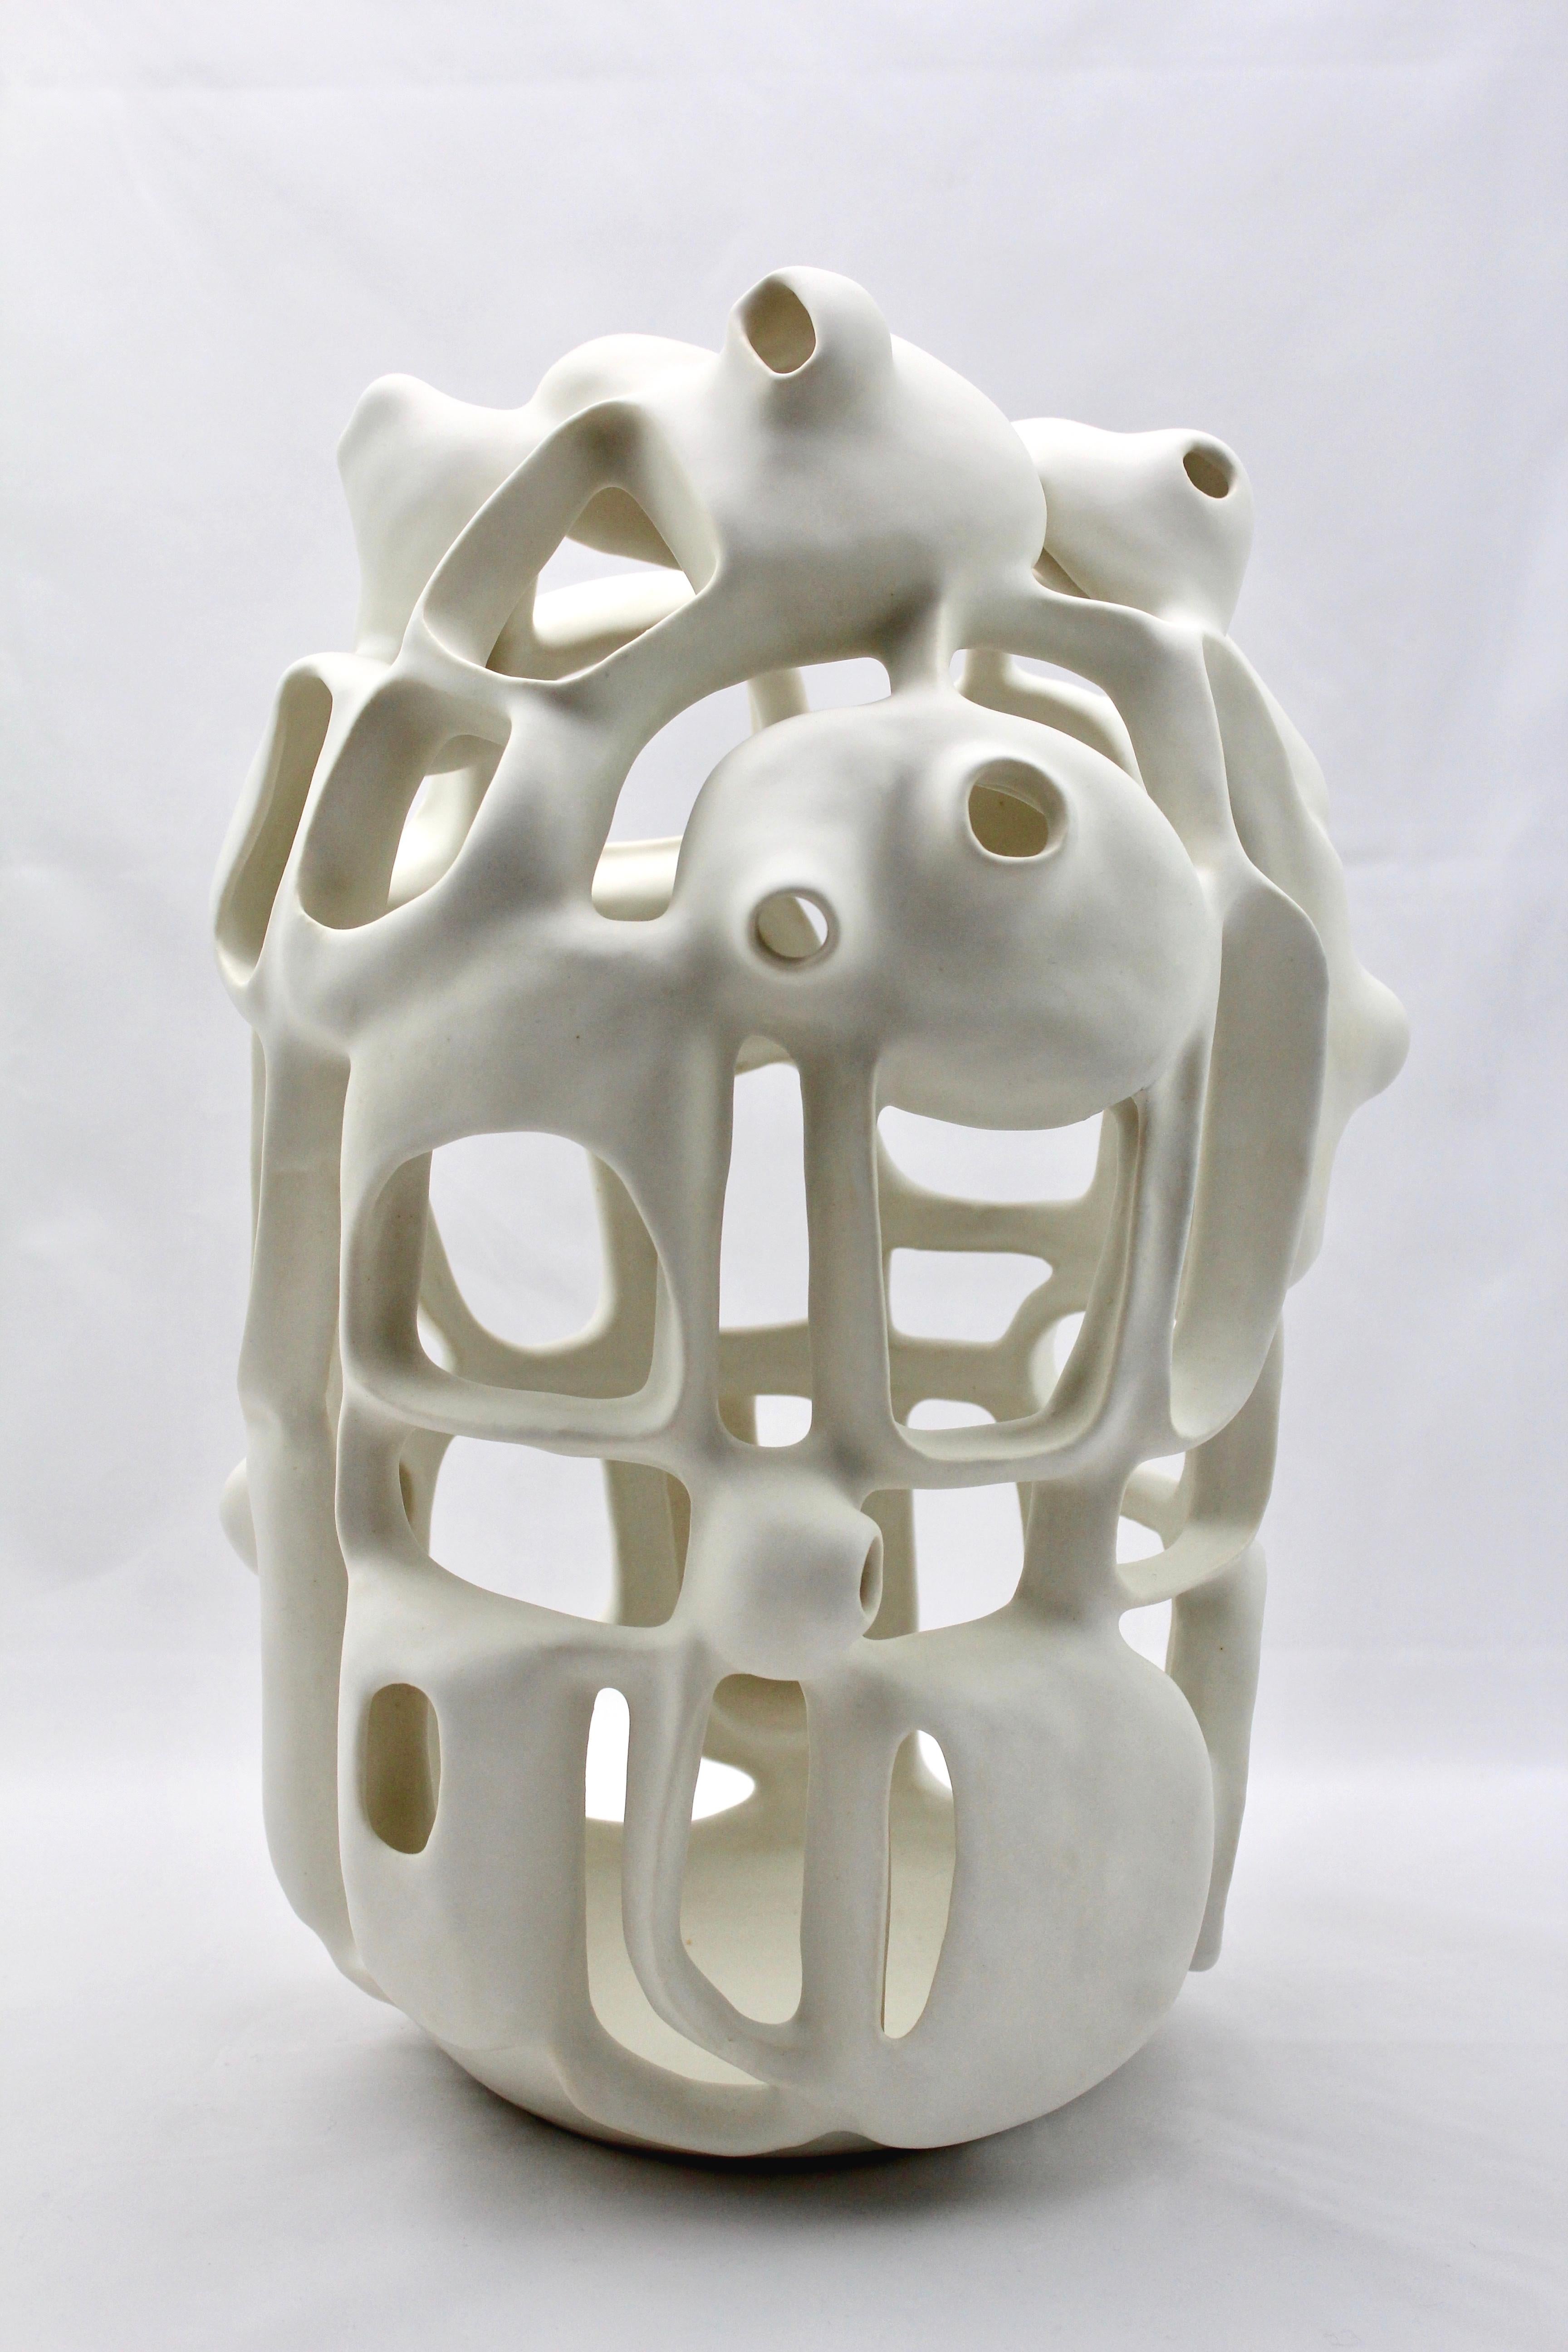 Untitled #5 - abstract geometric, organic white glazed porcelain sculpture 